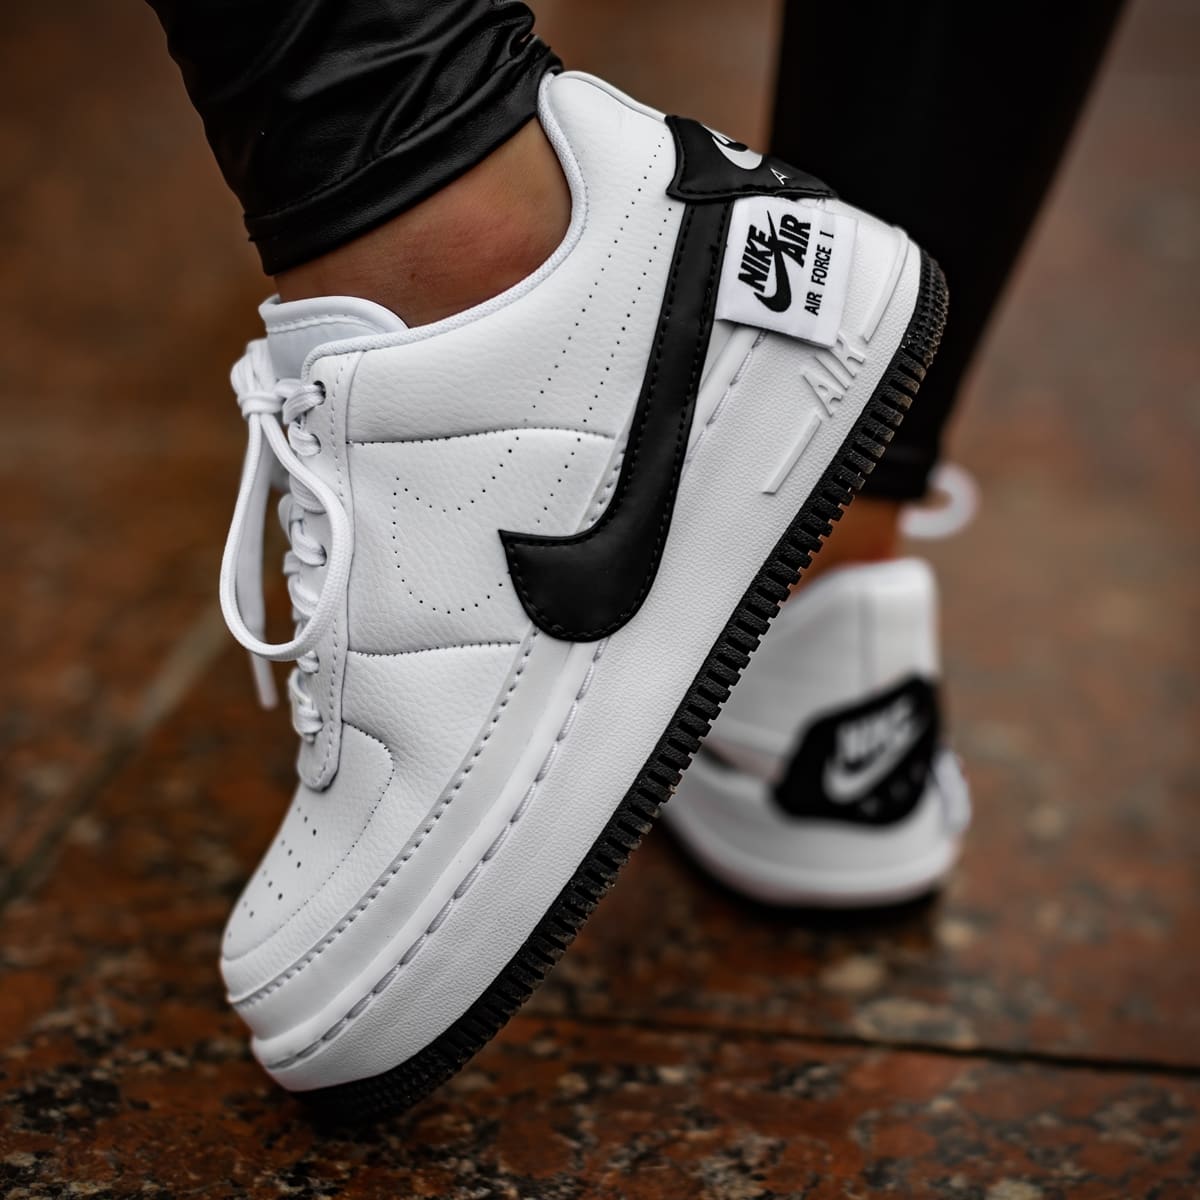 The Nike Air Force 1 is one of the most recognizable and enduring sneaker silhouettes in the world